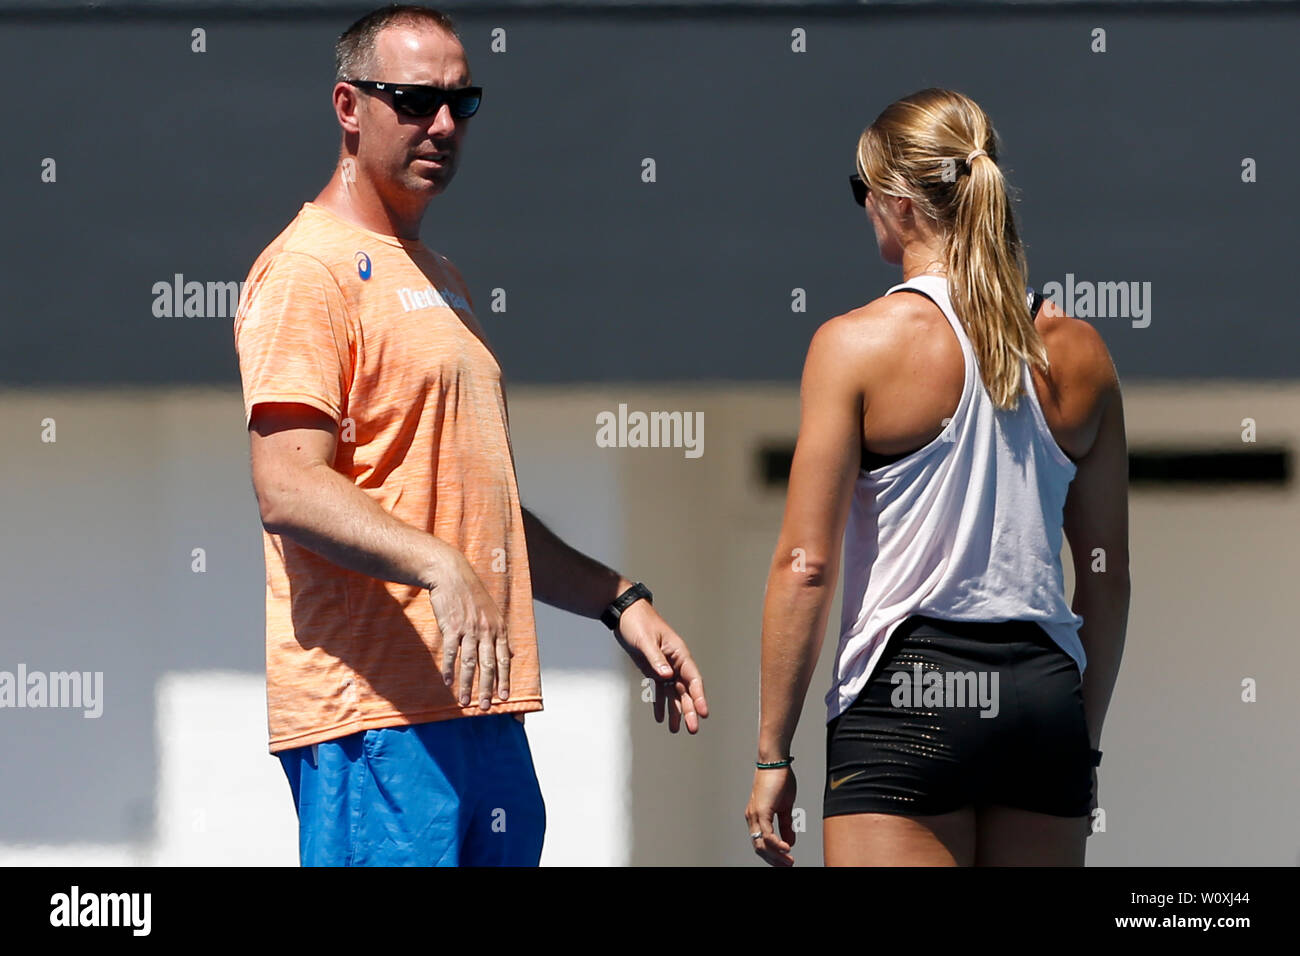 ARNHEM , 27-06-2019 , Papendal training centre , (L-R) Coach Bart Bennema  and Dafne Schippers during the 4 x 100m relay training of the Dutch team  Stock Photo - Alamy